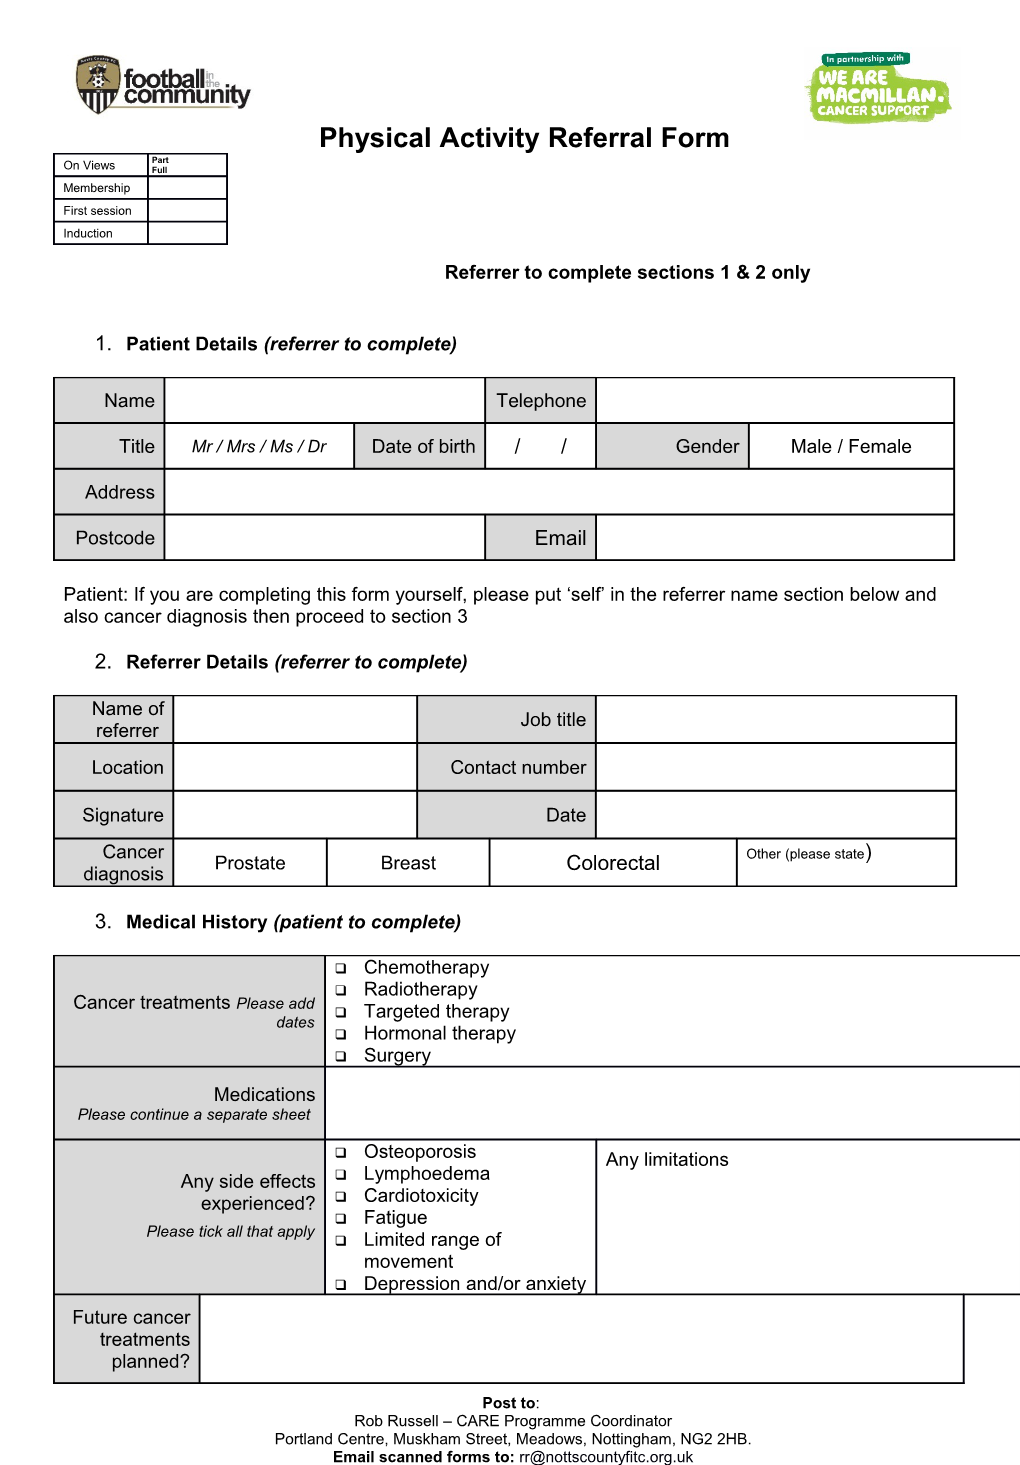 Physical Activity Referral Form